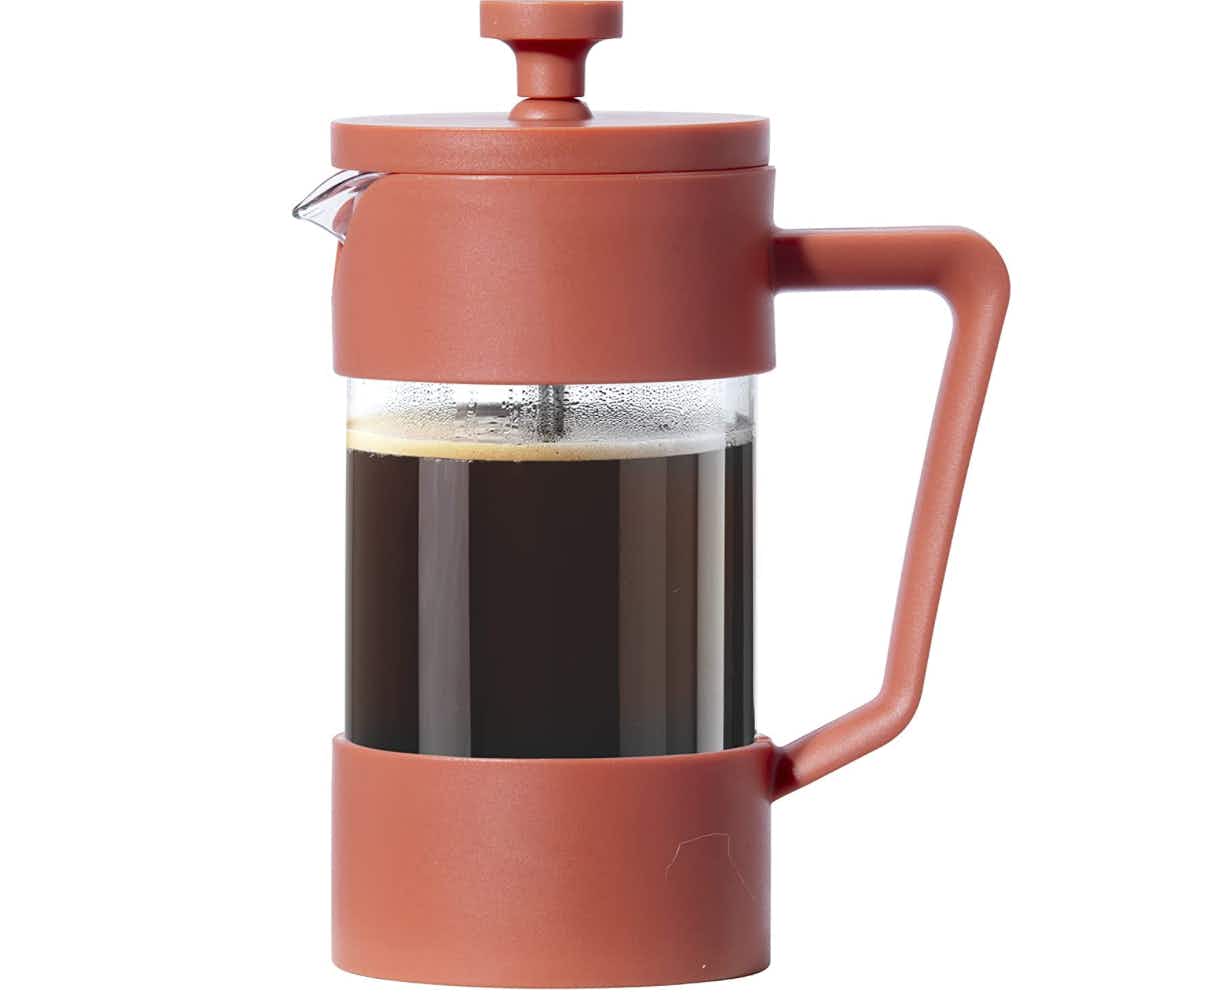 A brick red coffee press on a white background